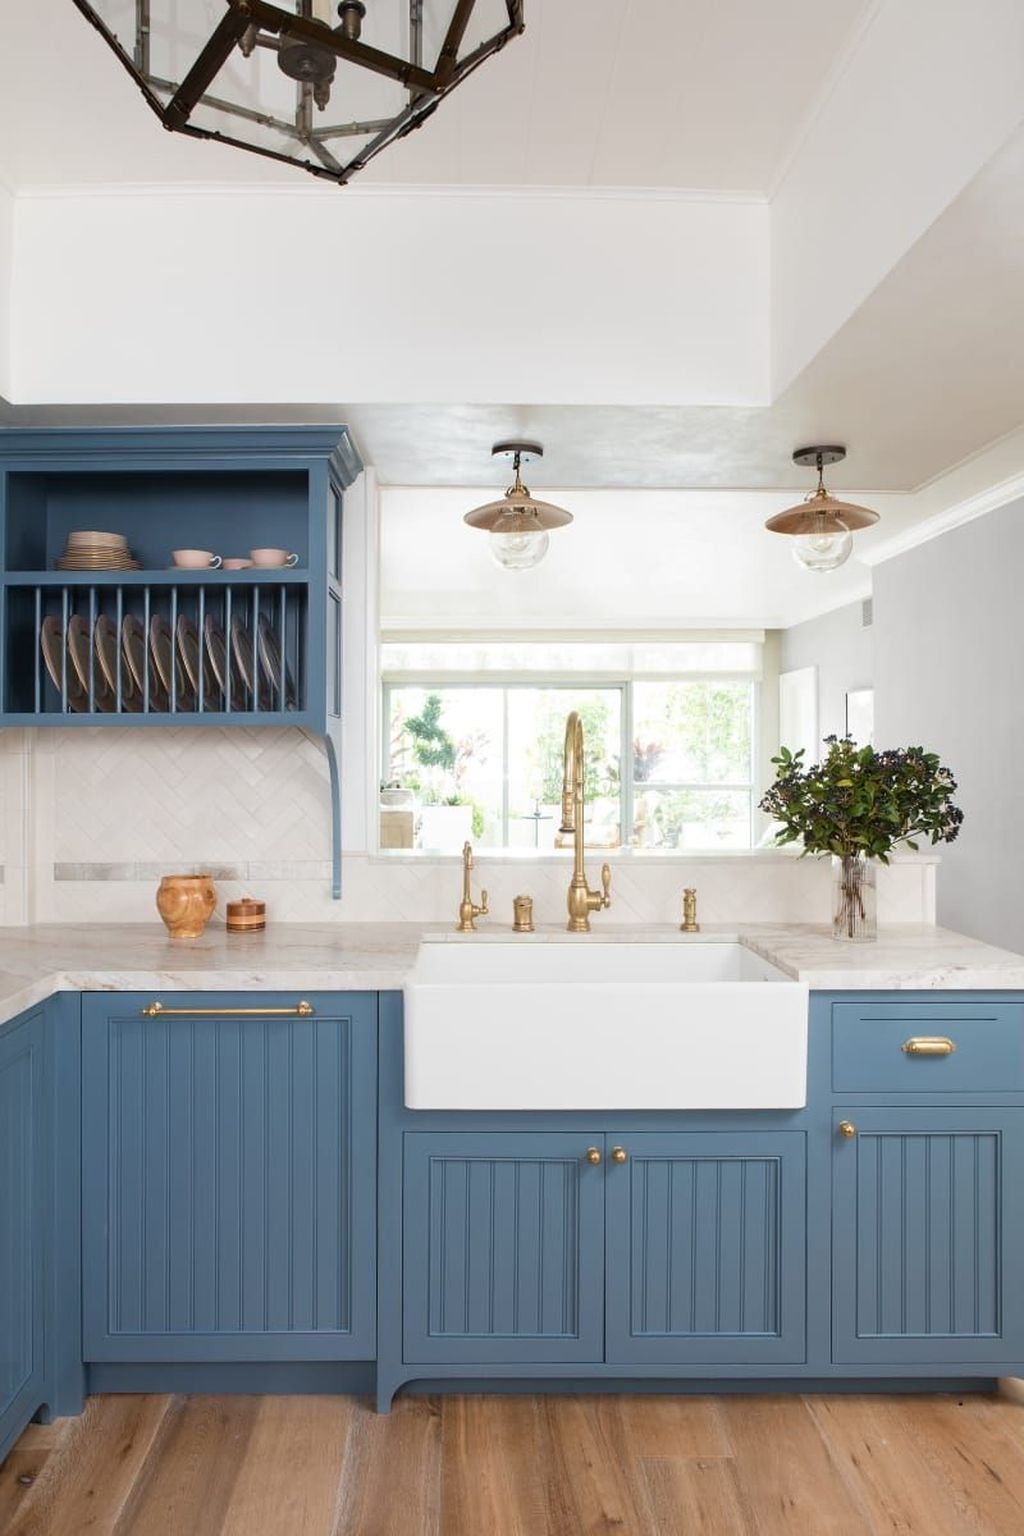 Cool Blue Kitchens Ideas For Inspiration 37